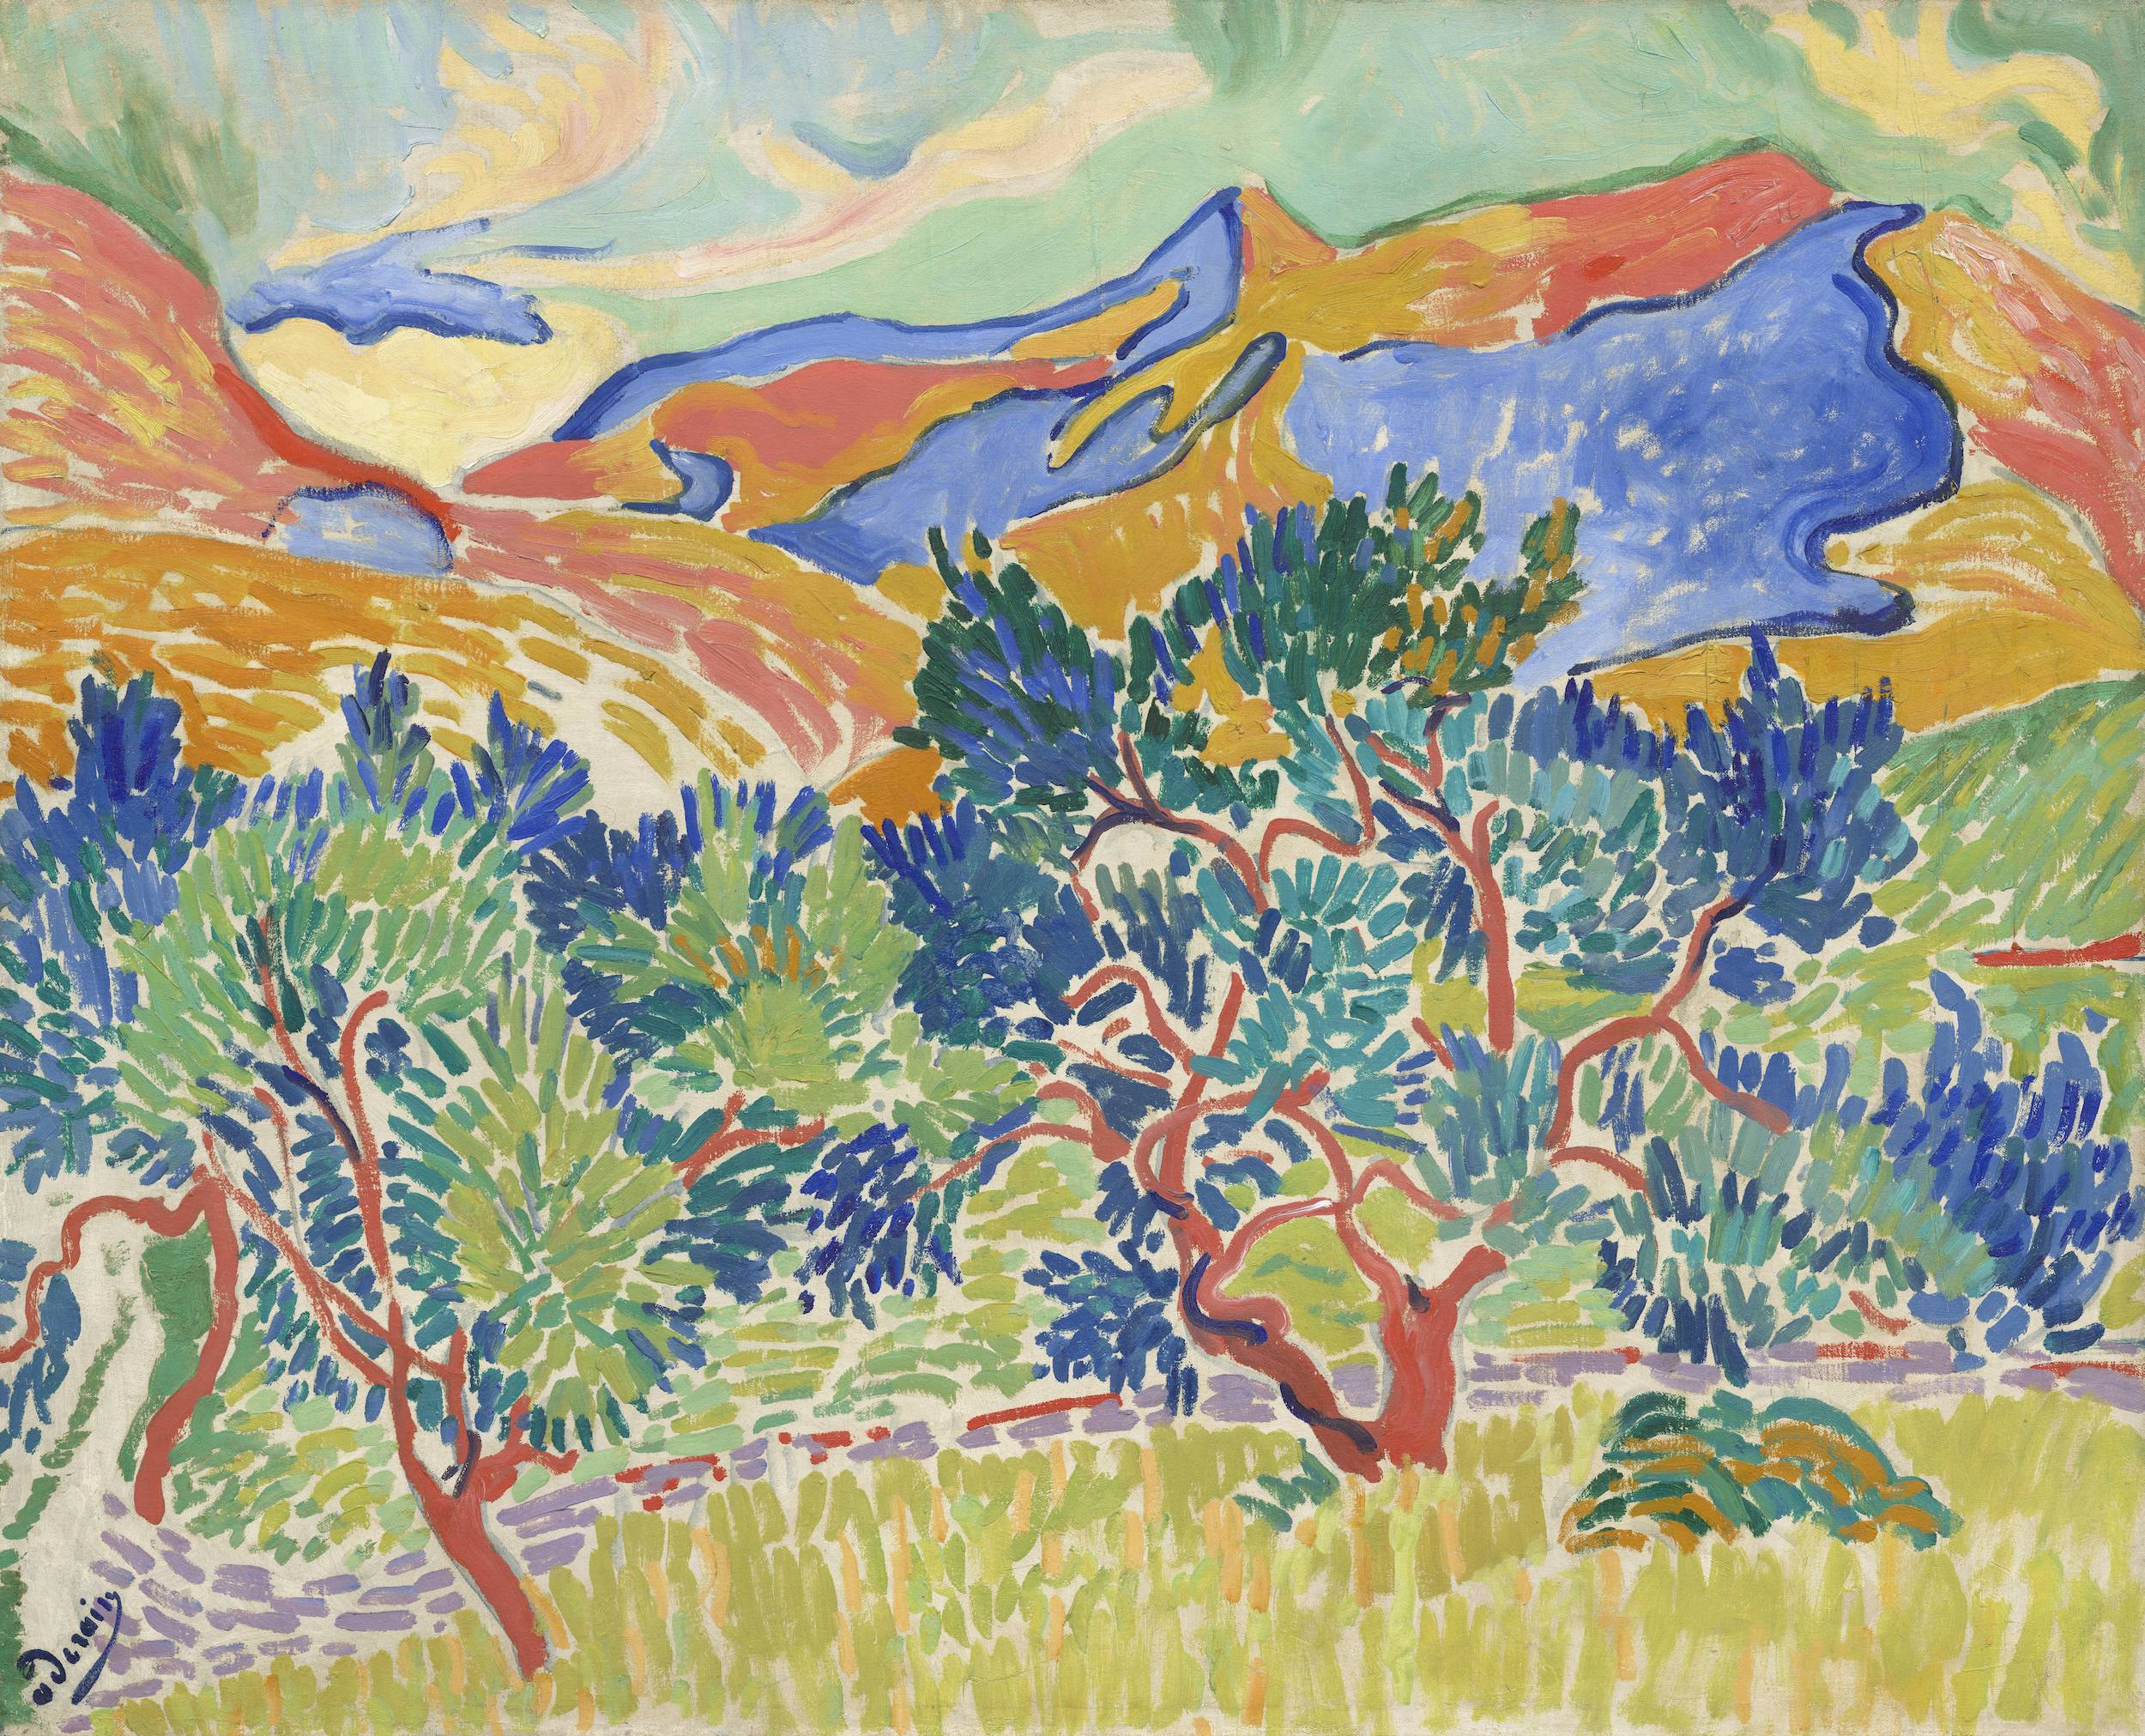 MFAH Opens Fauvism’s Vibrant ‘Vertigo of Color’ Exhibition – The Colorful Worlds of Matisse and Derain